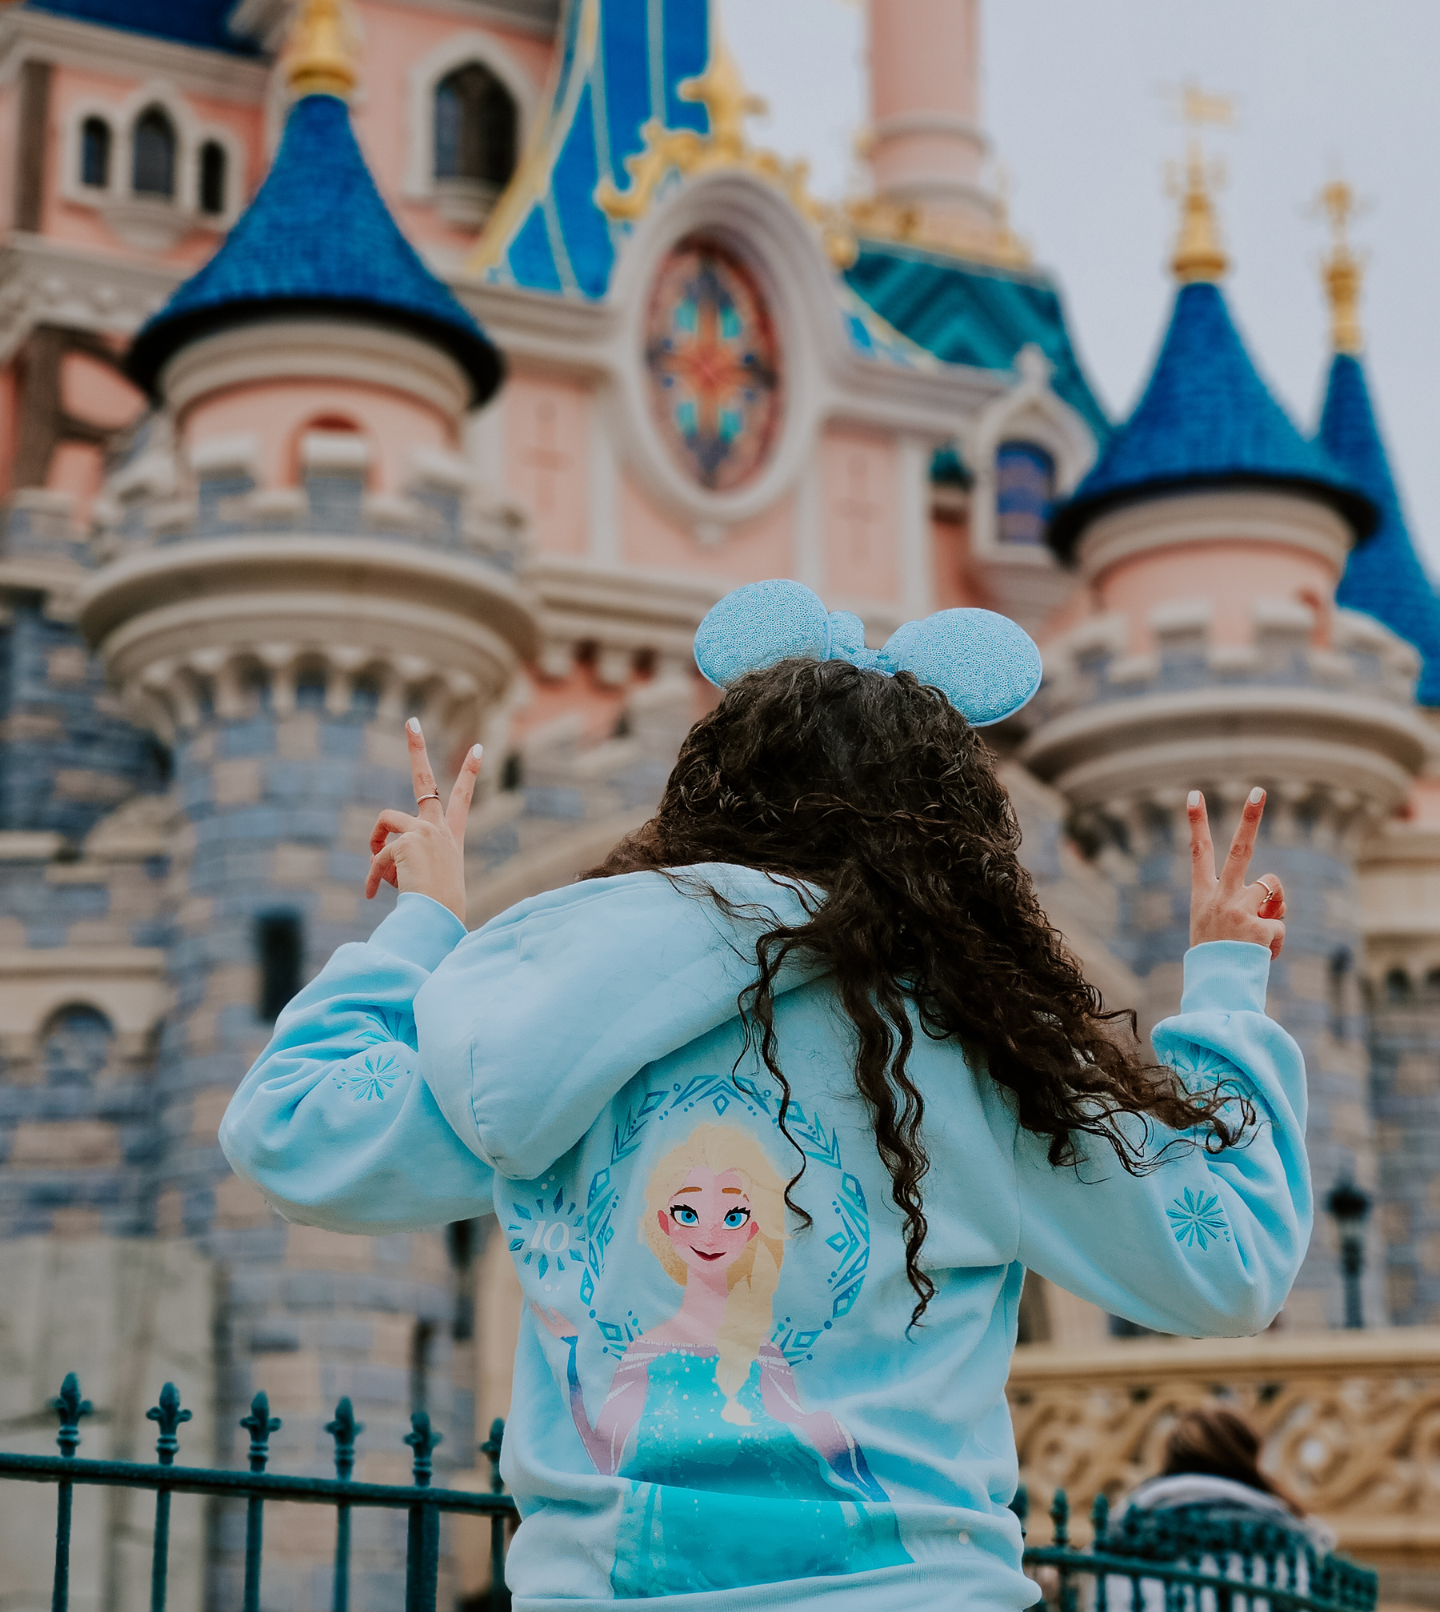 A girl in a Frozen hoodie standing in front of a Disney castle, creating magical memories.